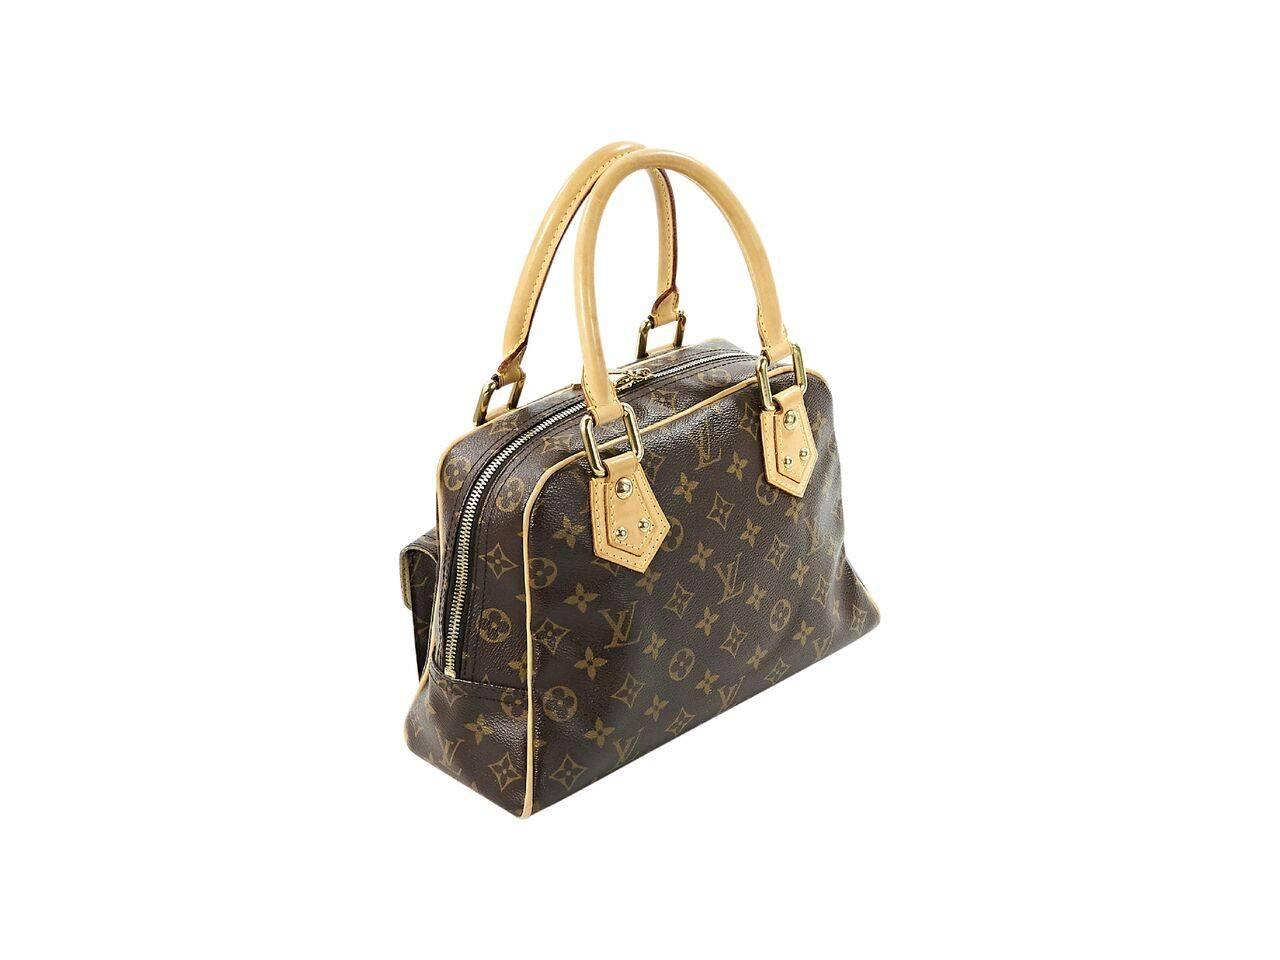 Product details:  Brown coated canvas monogram Manhattan PM handbag by Louis Vuitton.  Top carry handles.  Top zip closure.  Lined interior with slide pocket.  Front exterior buckle flap pockets.  Goldtone hardware.  11.5